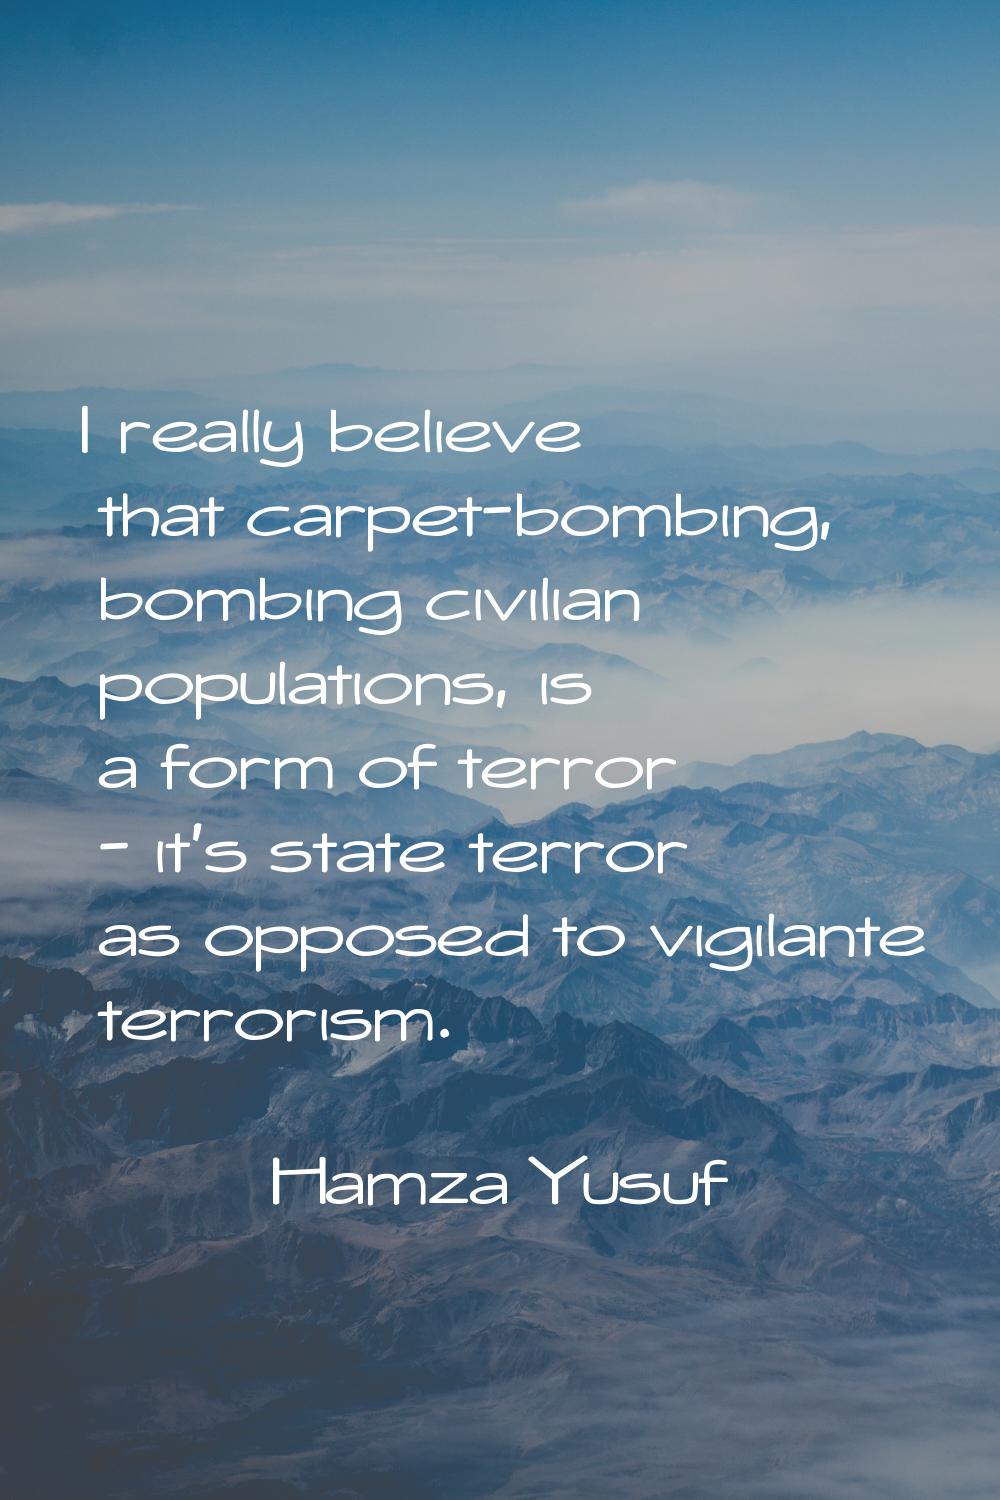 I really believe that carpet-bombing, bombing civilian populations, is a form of terror - it's stat